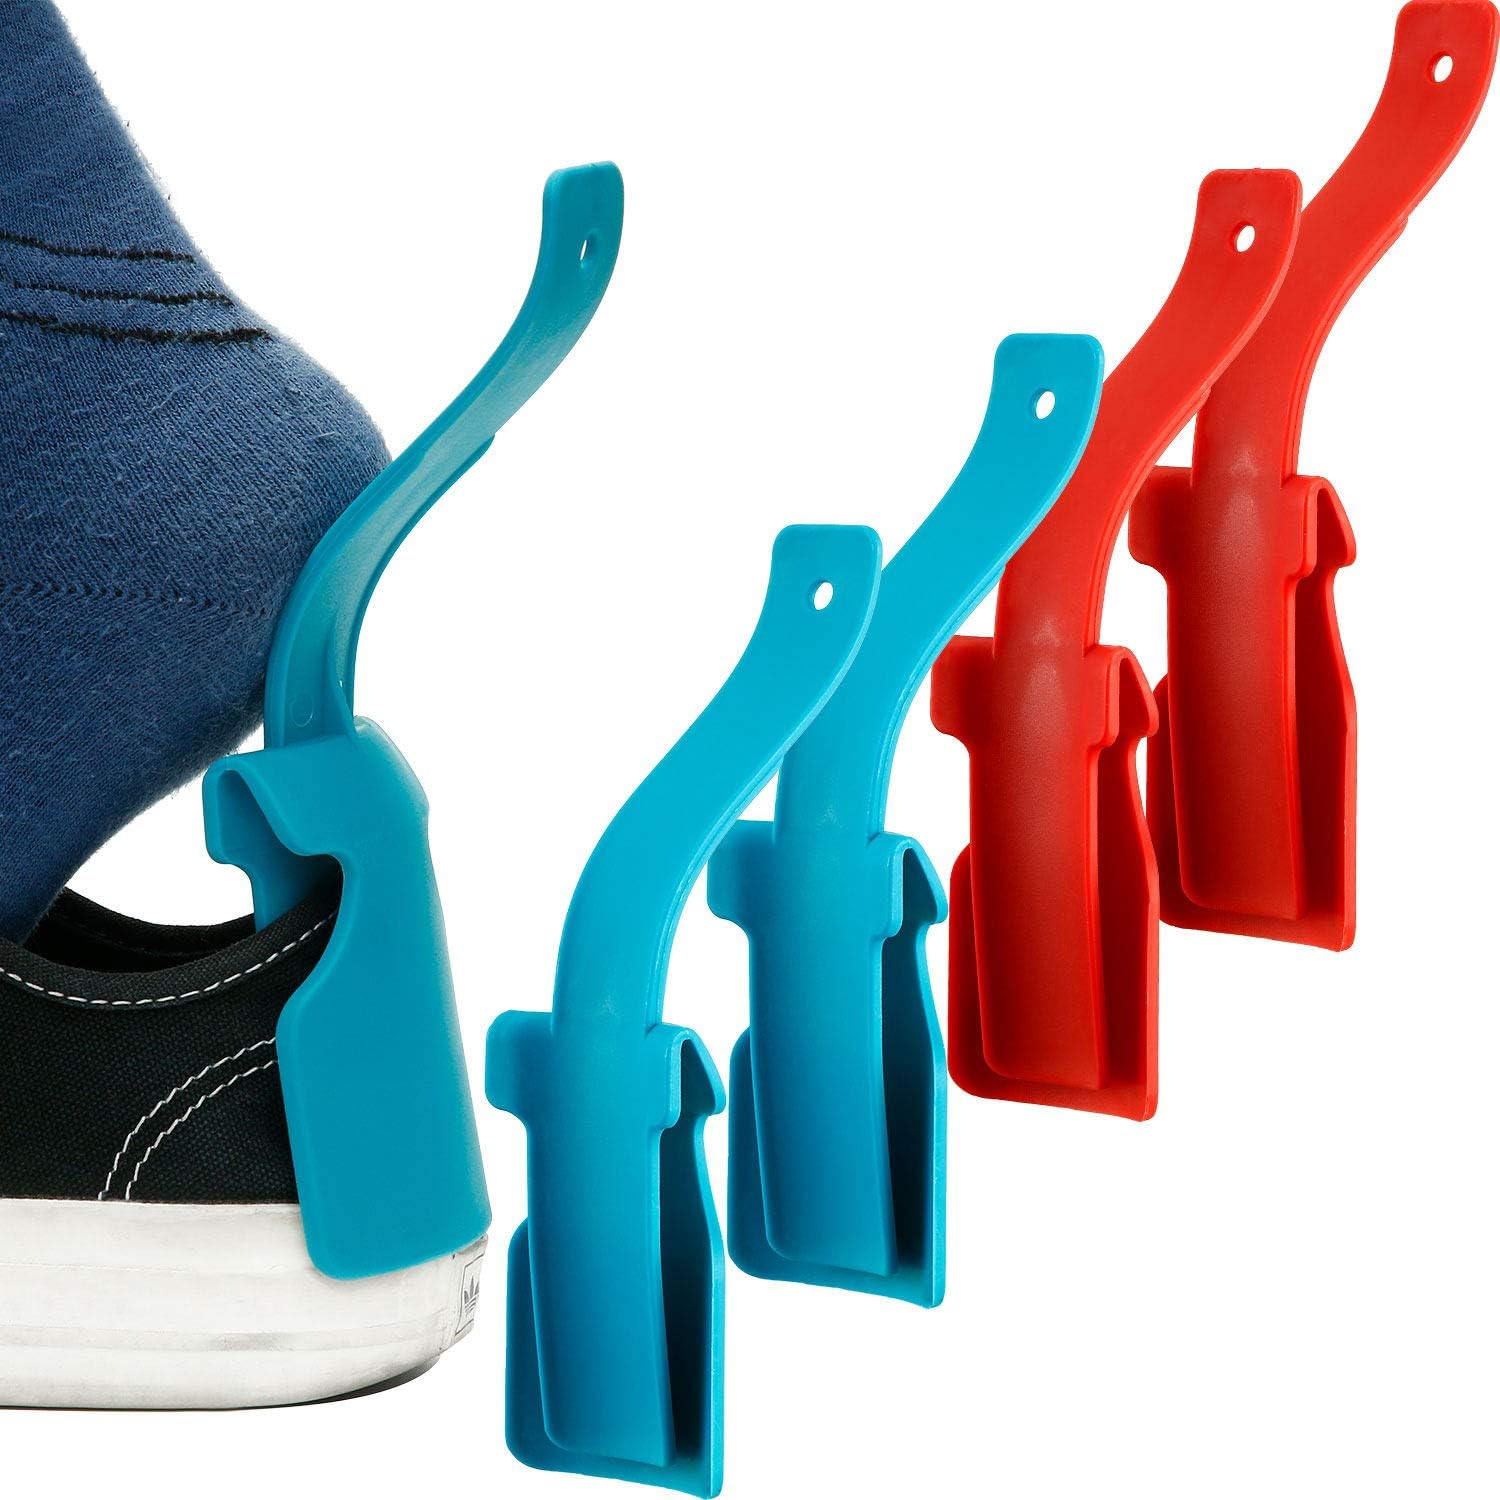 4 Pieces Lazy Shoe Helper Portable Sock Shoe Slider Travel Handled Shoe Horn Shoe Lifting Wearing Helper Tool Easy on Easy Off Plastic Shoehorn One Size Fits Most Shoes All Age, BlueRed